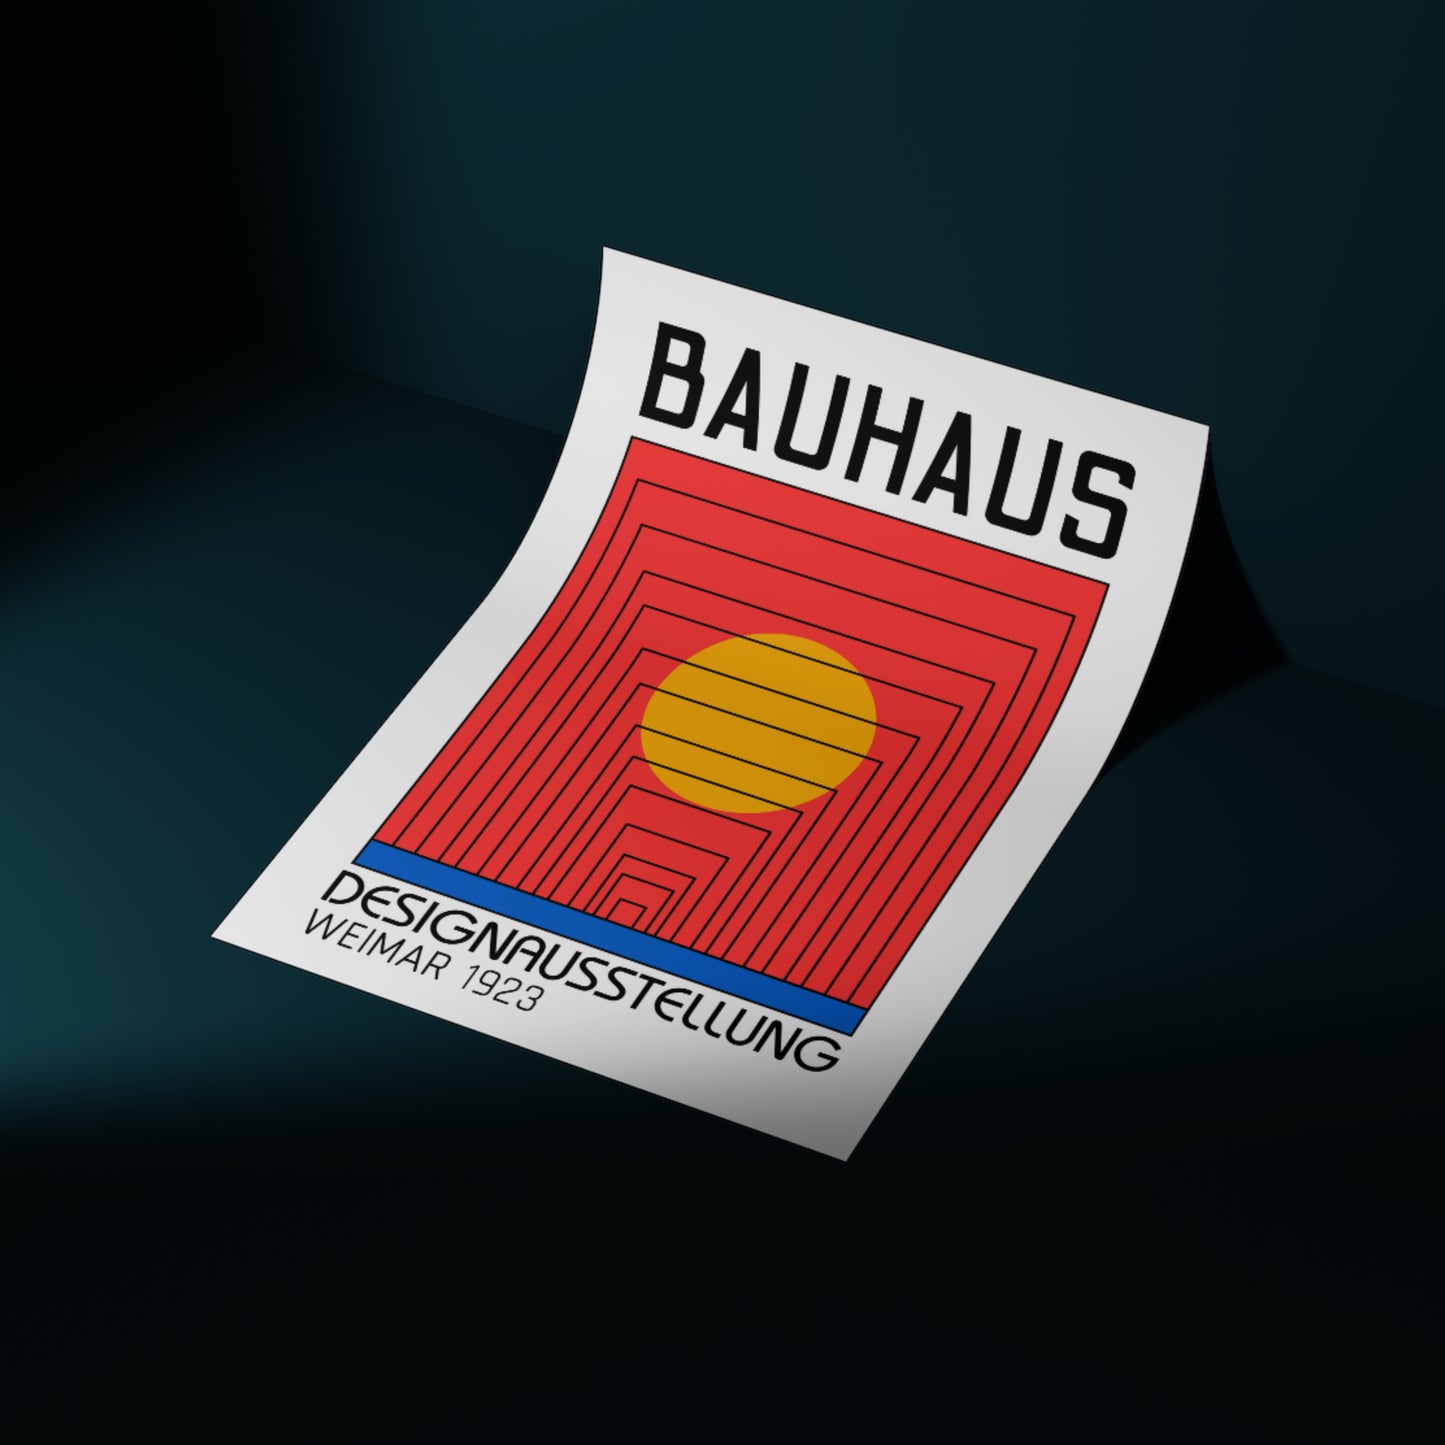 Bauhaus, Red and Yellow Exhibition Art Print, A3/A4/A5 Sizes